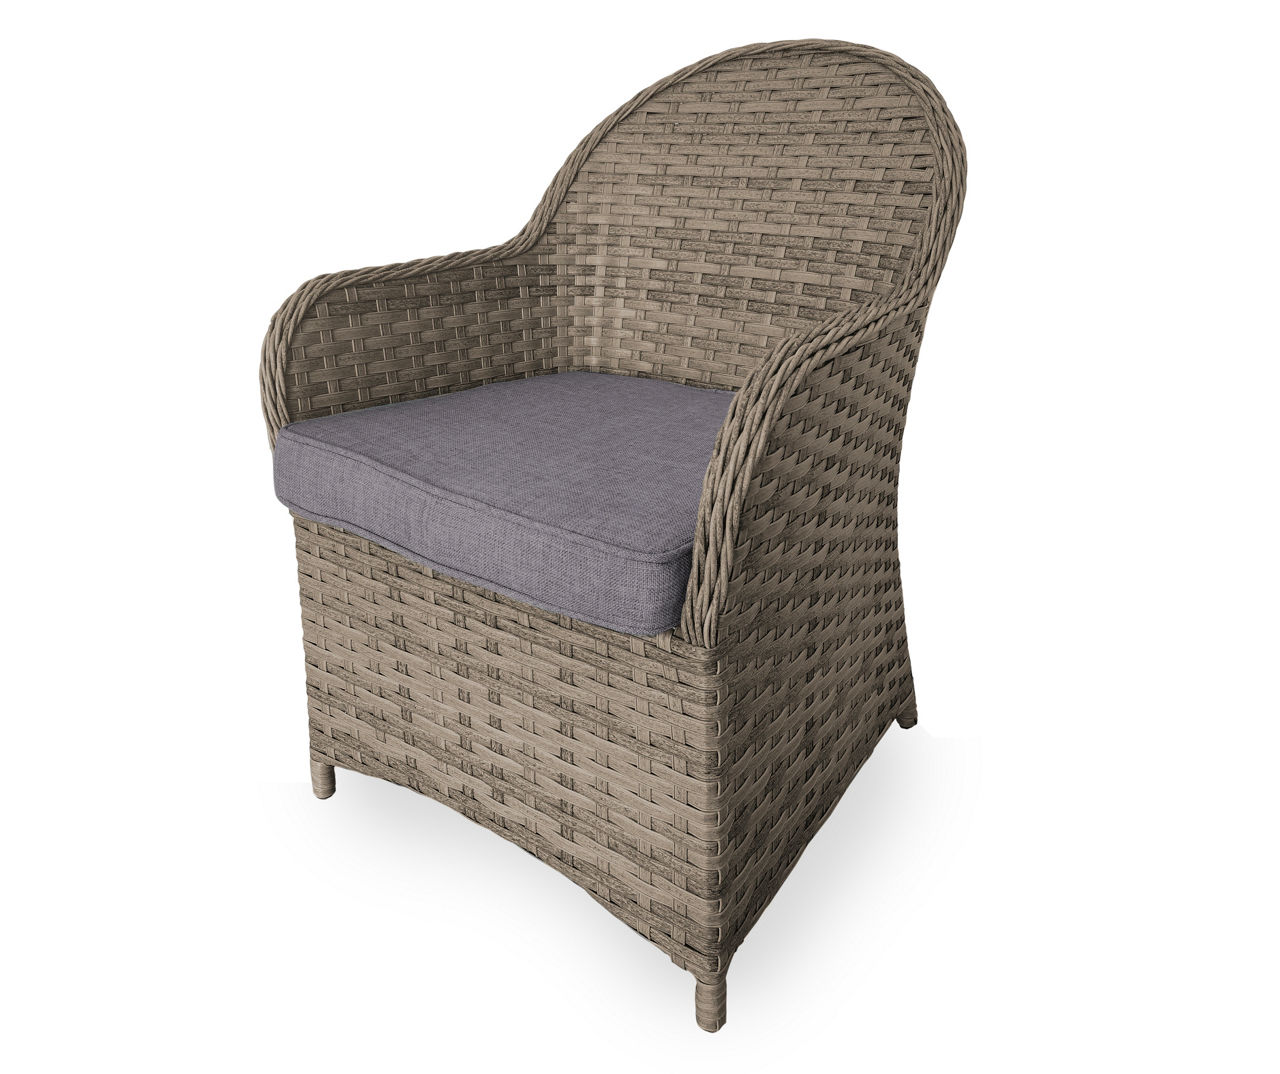 Autumn Cove Gray All-Weather Wicker Patio Captain's Dining Chair